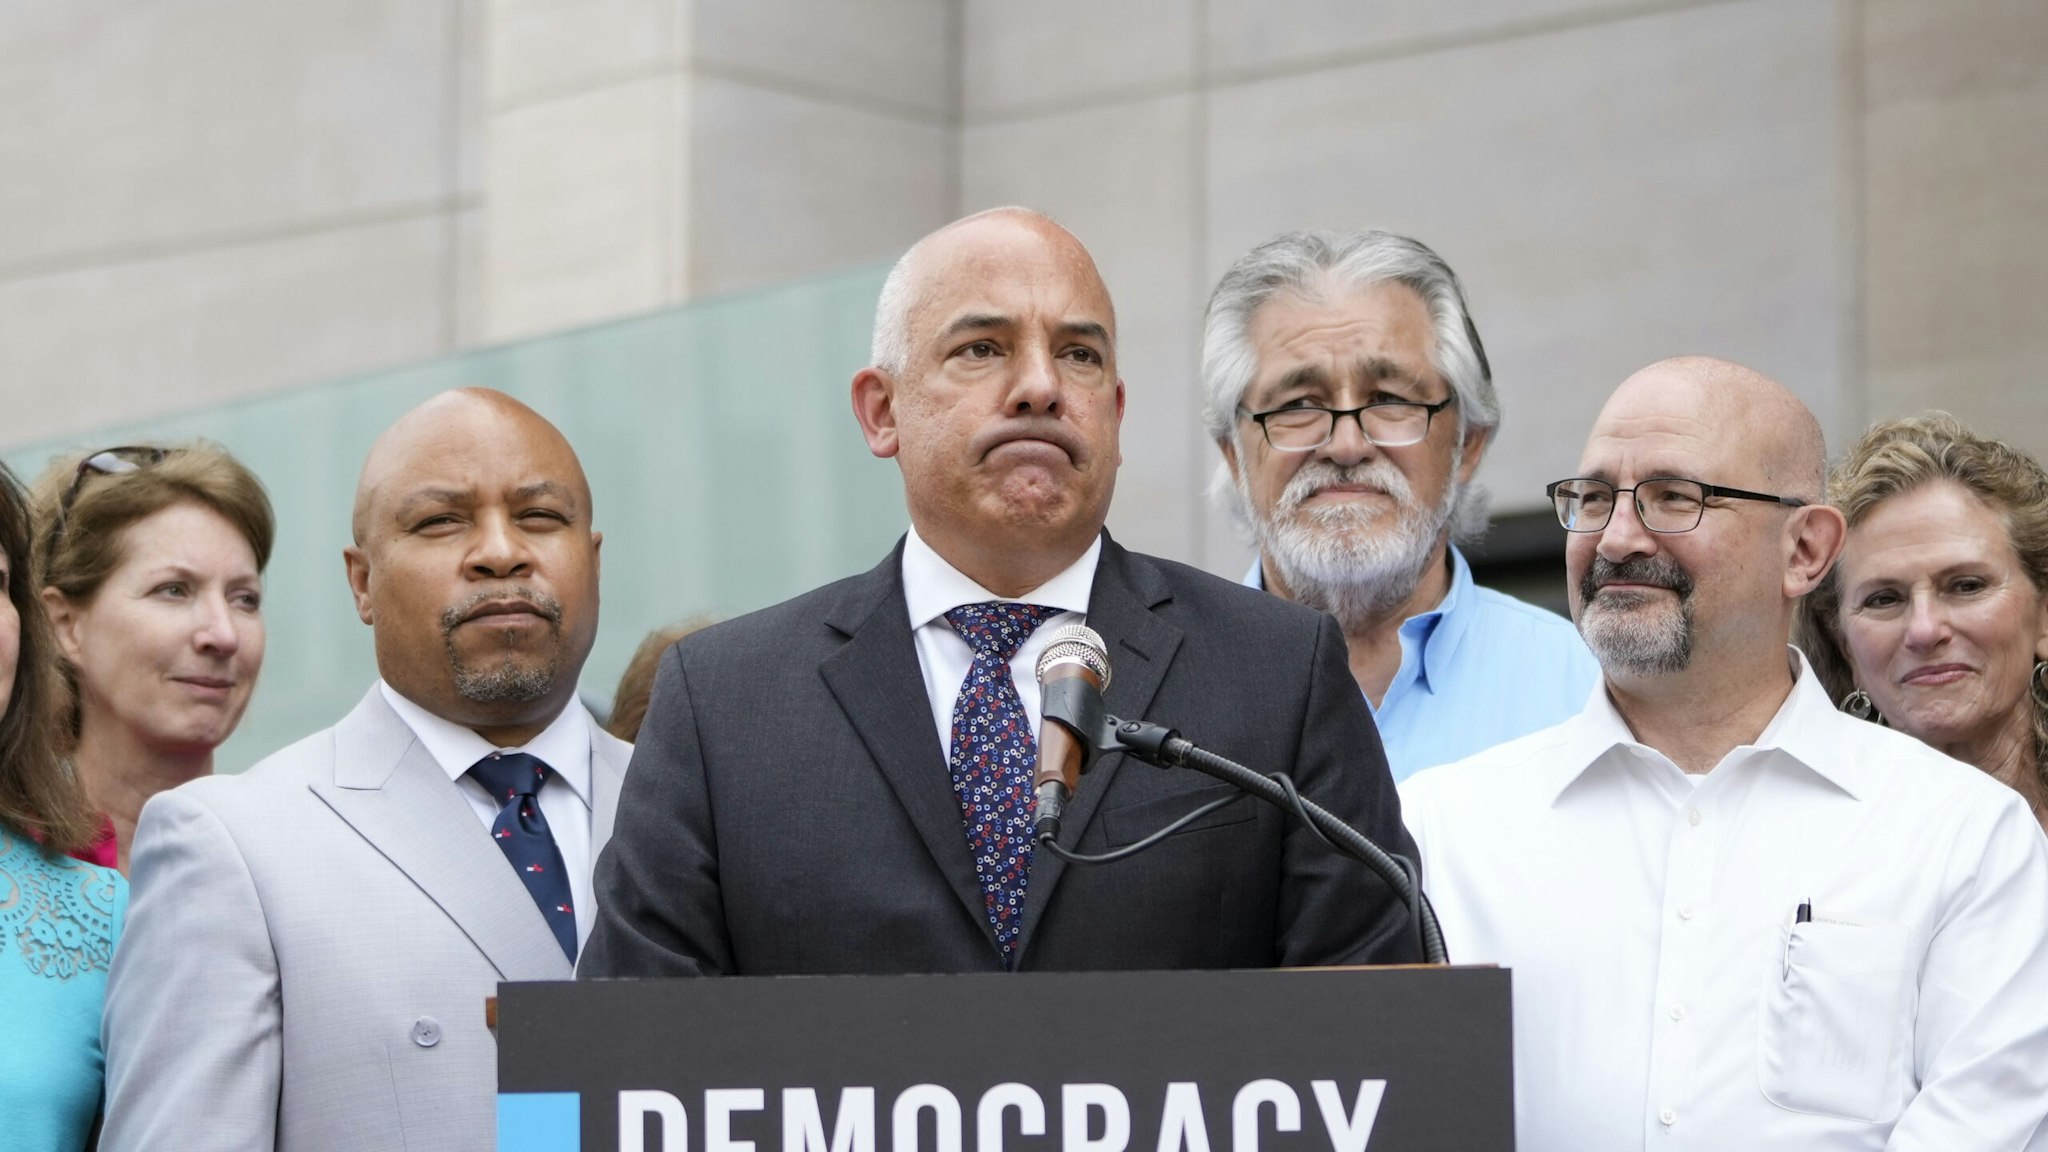 WASHINGTON, DC - JULY 15: Surrounded by Democratic members of the Texas State Legislature, Texas State Rep. Chris Turner (D-District 101), Chair of the Texas House Democratic Caucus, speaks during a news conference outside the AFL-CIO headquarters on July 15, 2021 in Washington, DC. The organized labor advocates called for the Senate to repeal the filibuster to allow passage of several bills they support, including the For The People Act and The John Lewis Voting Rights Act.